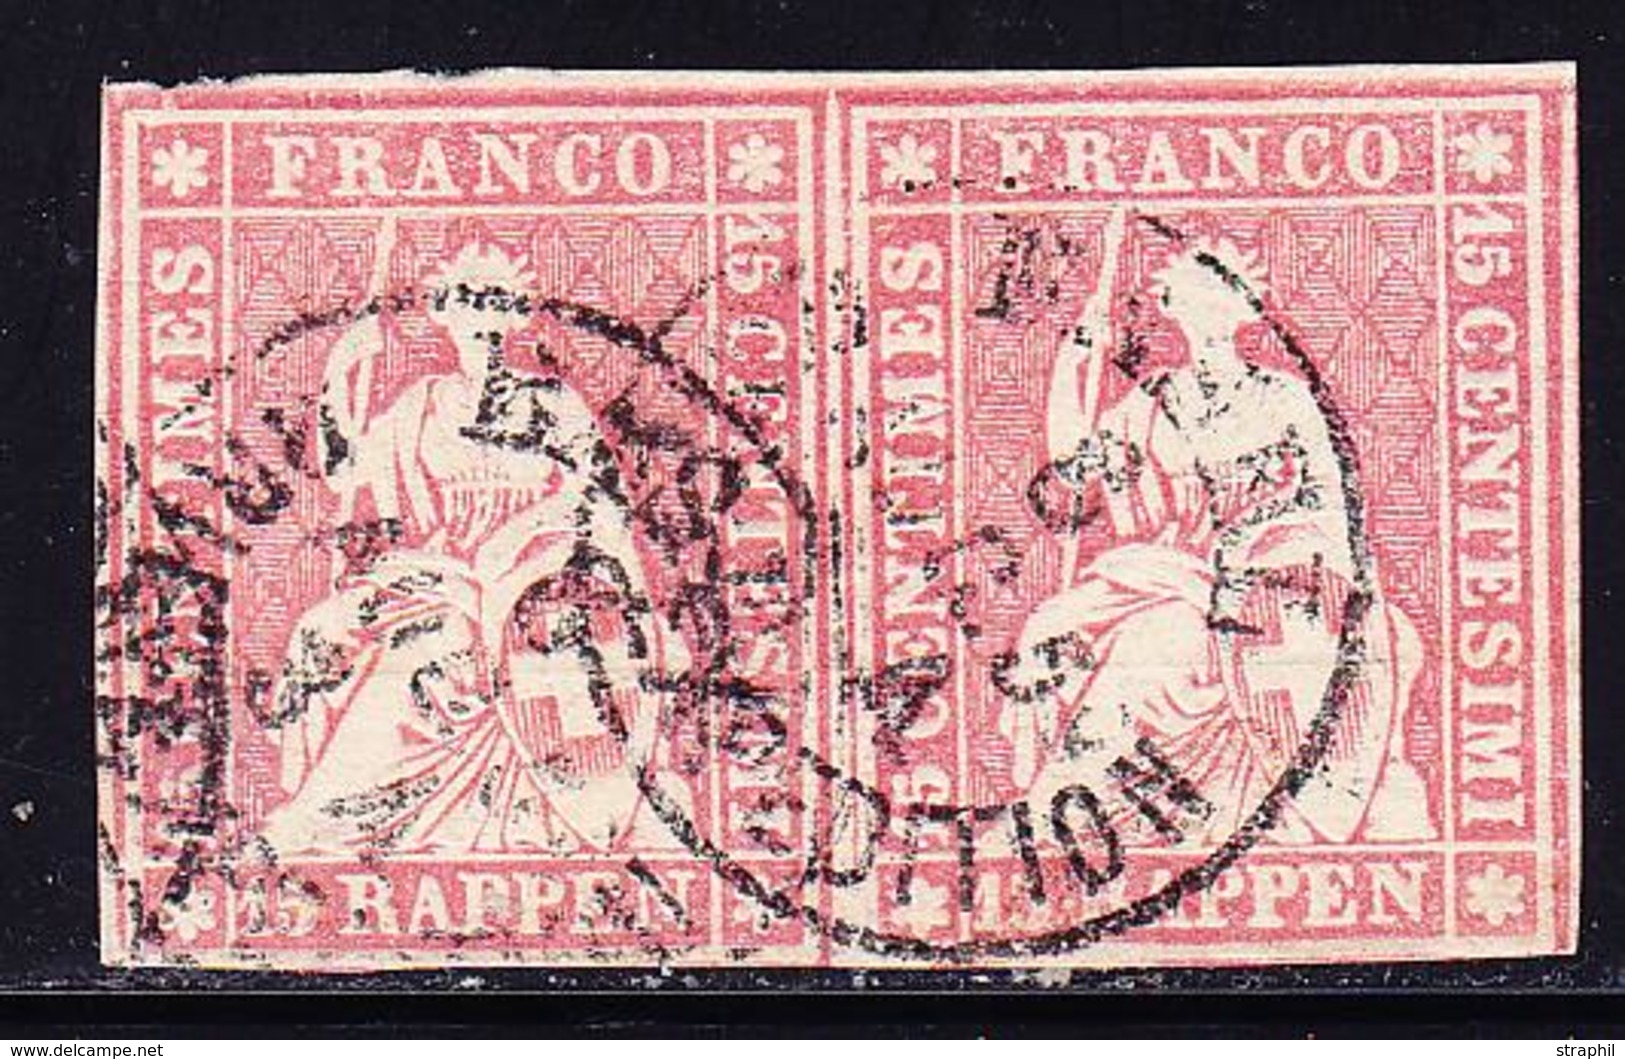 O SUISSE - O - N°28 - Paire - Obl Basel Exp. - 6 Aug 59 - Signé Hermann - Tb - 1843-1852 Federal & Cantonal Stamps